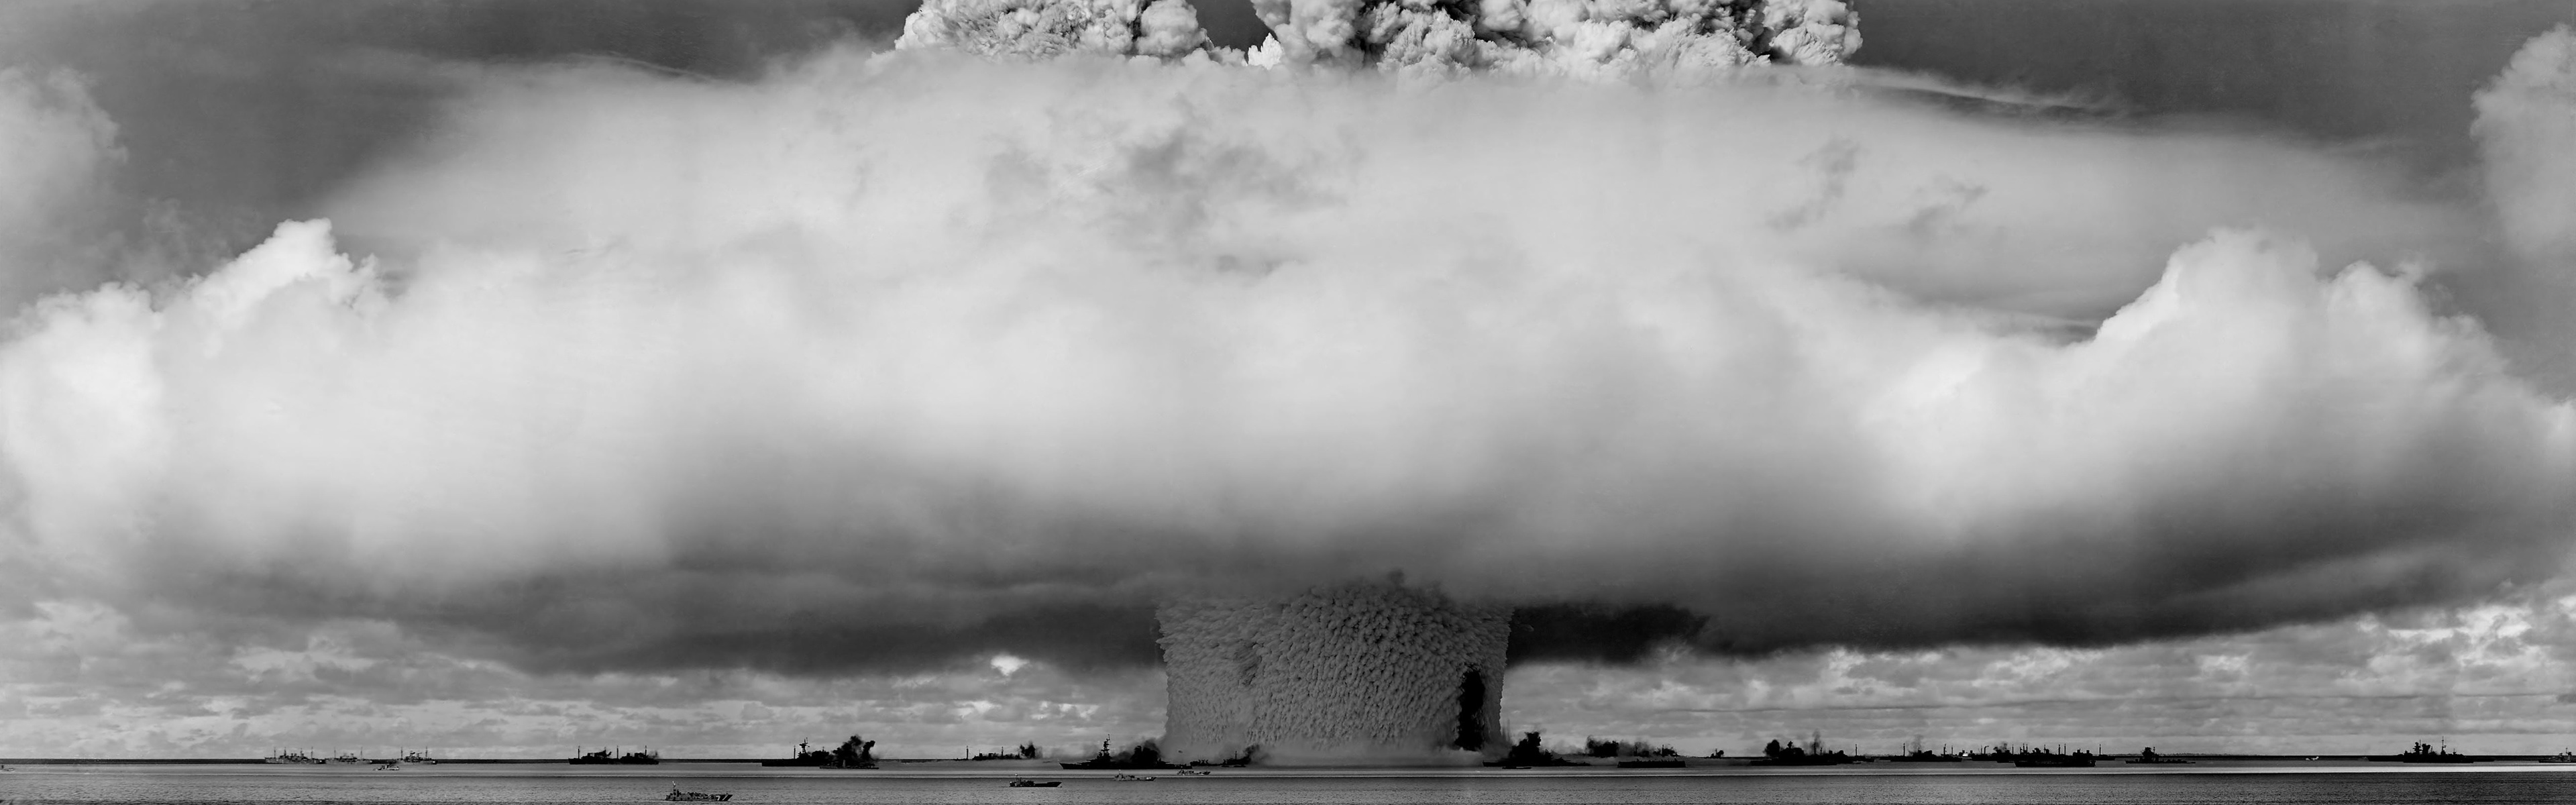 explosions, Mushrooms, Grayscale, Monochrome, Nuclear, Explosions Wallpaper